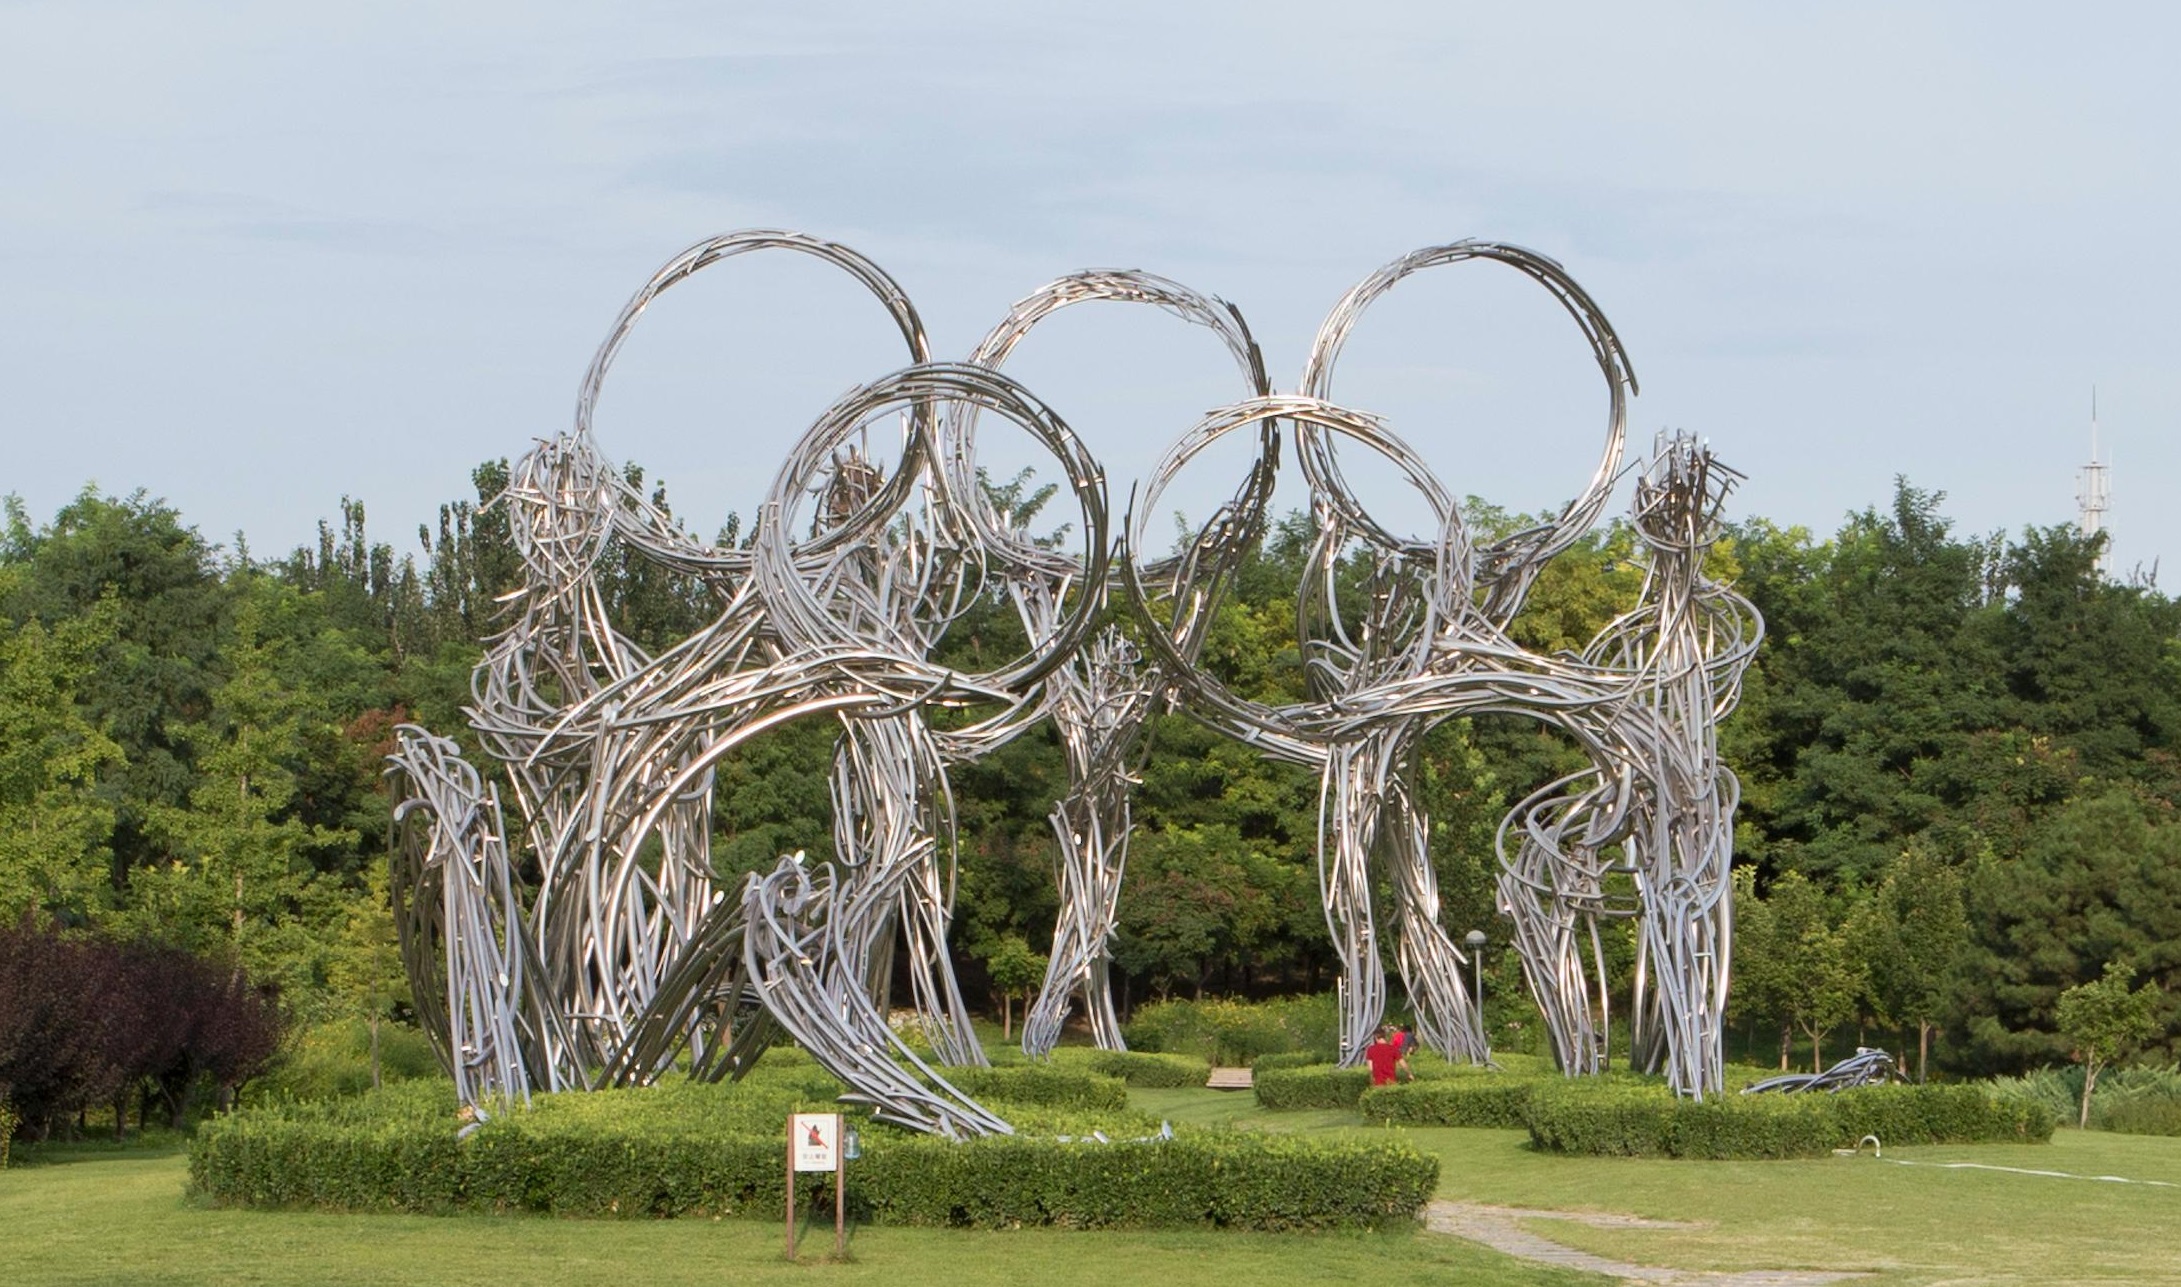 Beijing 2022 Winter Og, Games Preparation, 2015 A Sculpture In The Olympic Forest Park.